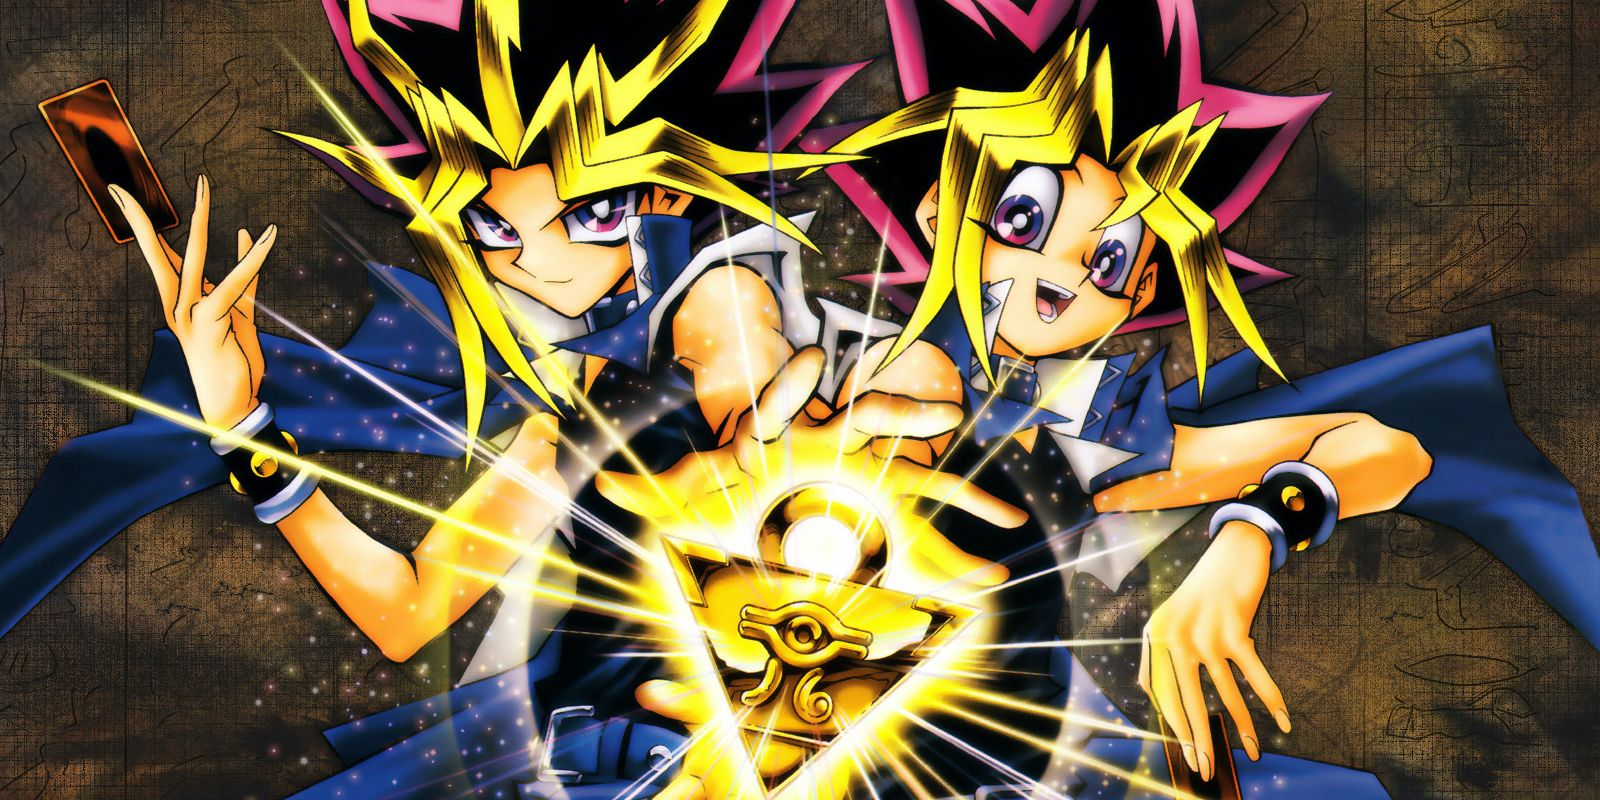 Yami Yugi from the Yu-Gi-Oh! Duel Monsters anime